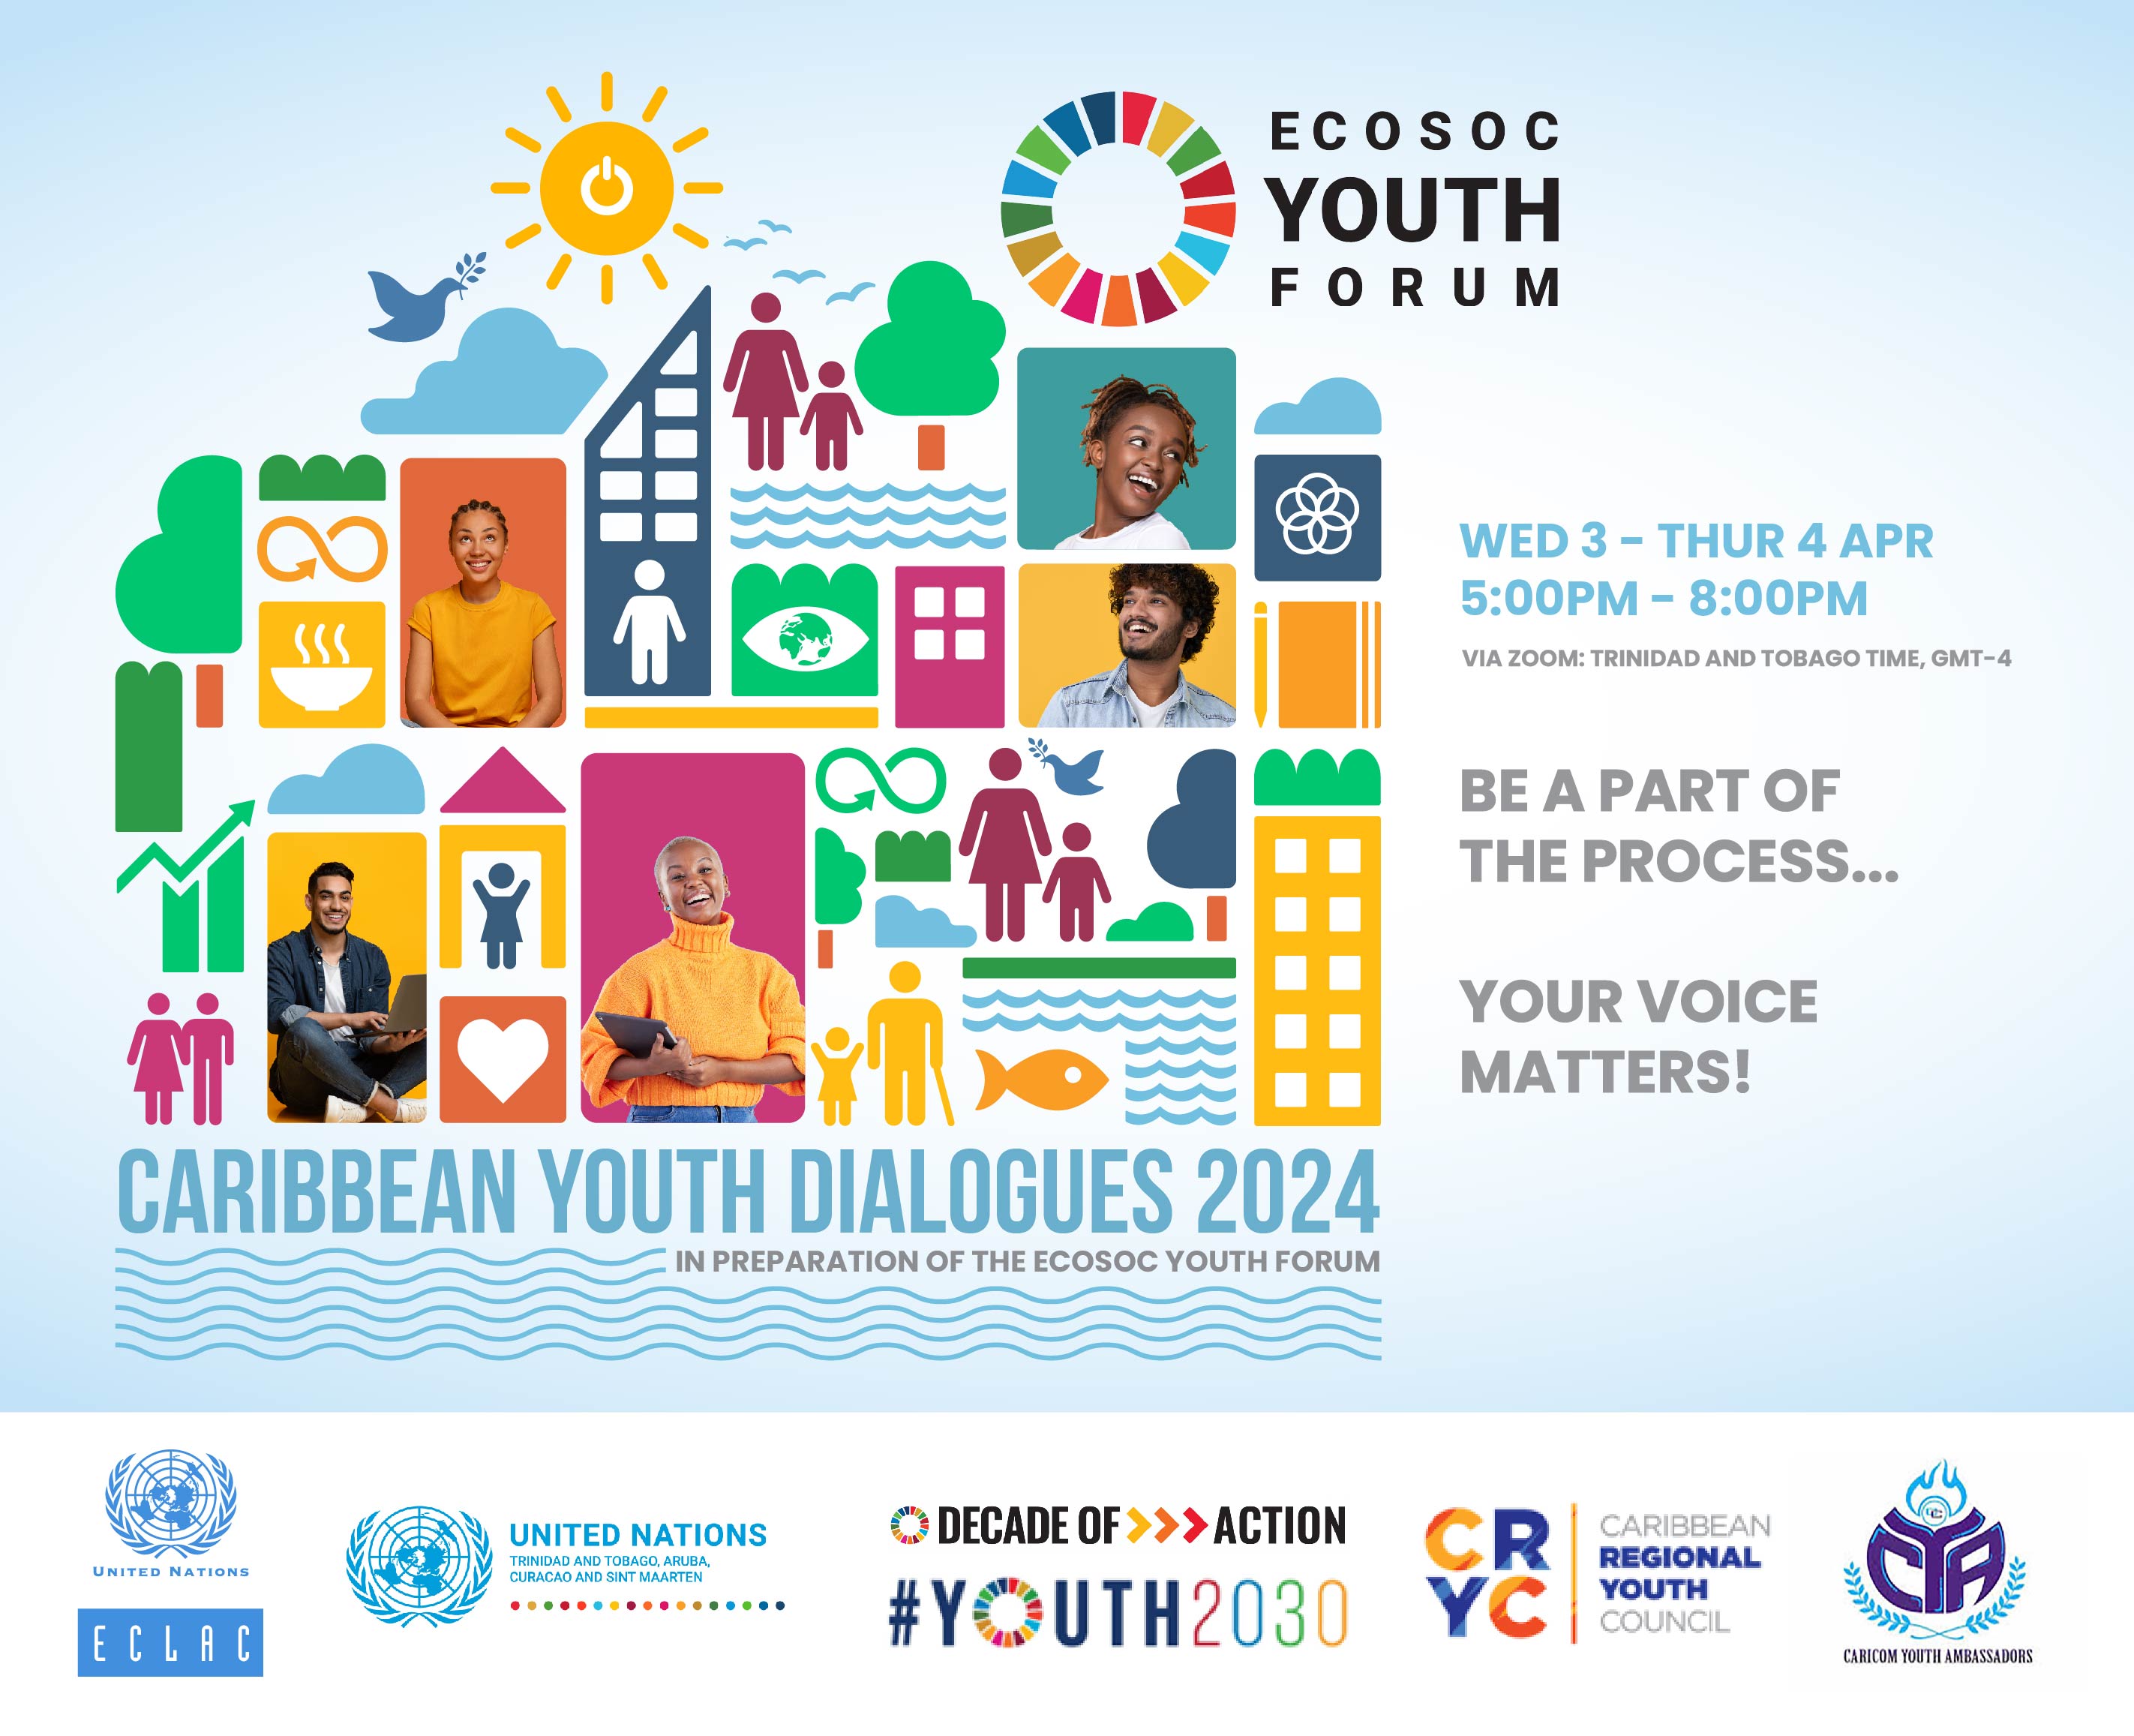 Caribbean Youth Dialogues 2024 In preparation of the ECOSOC Youth Forum